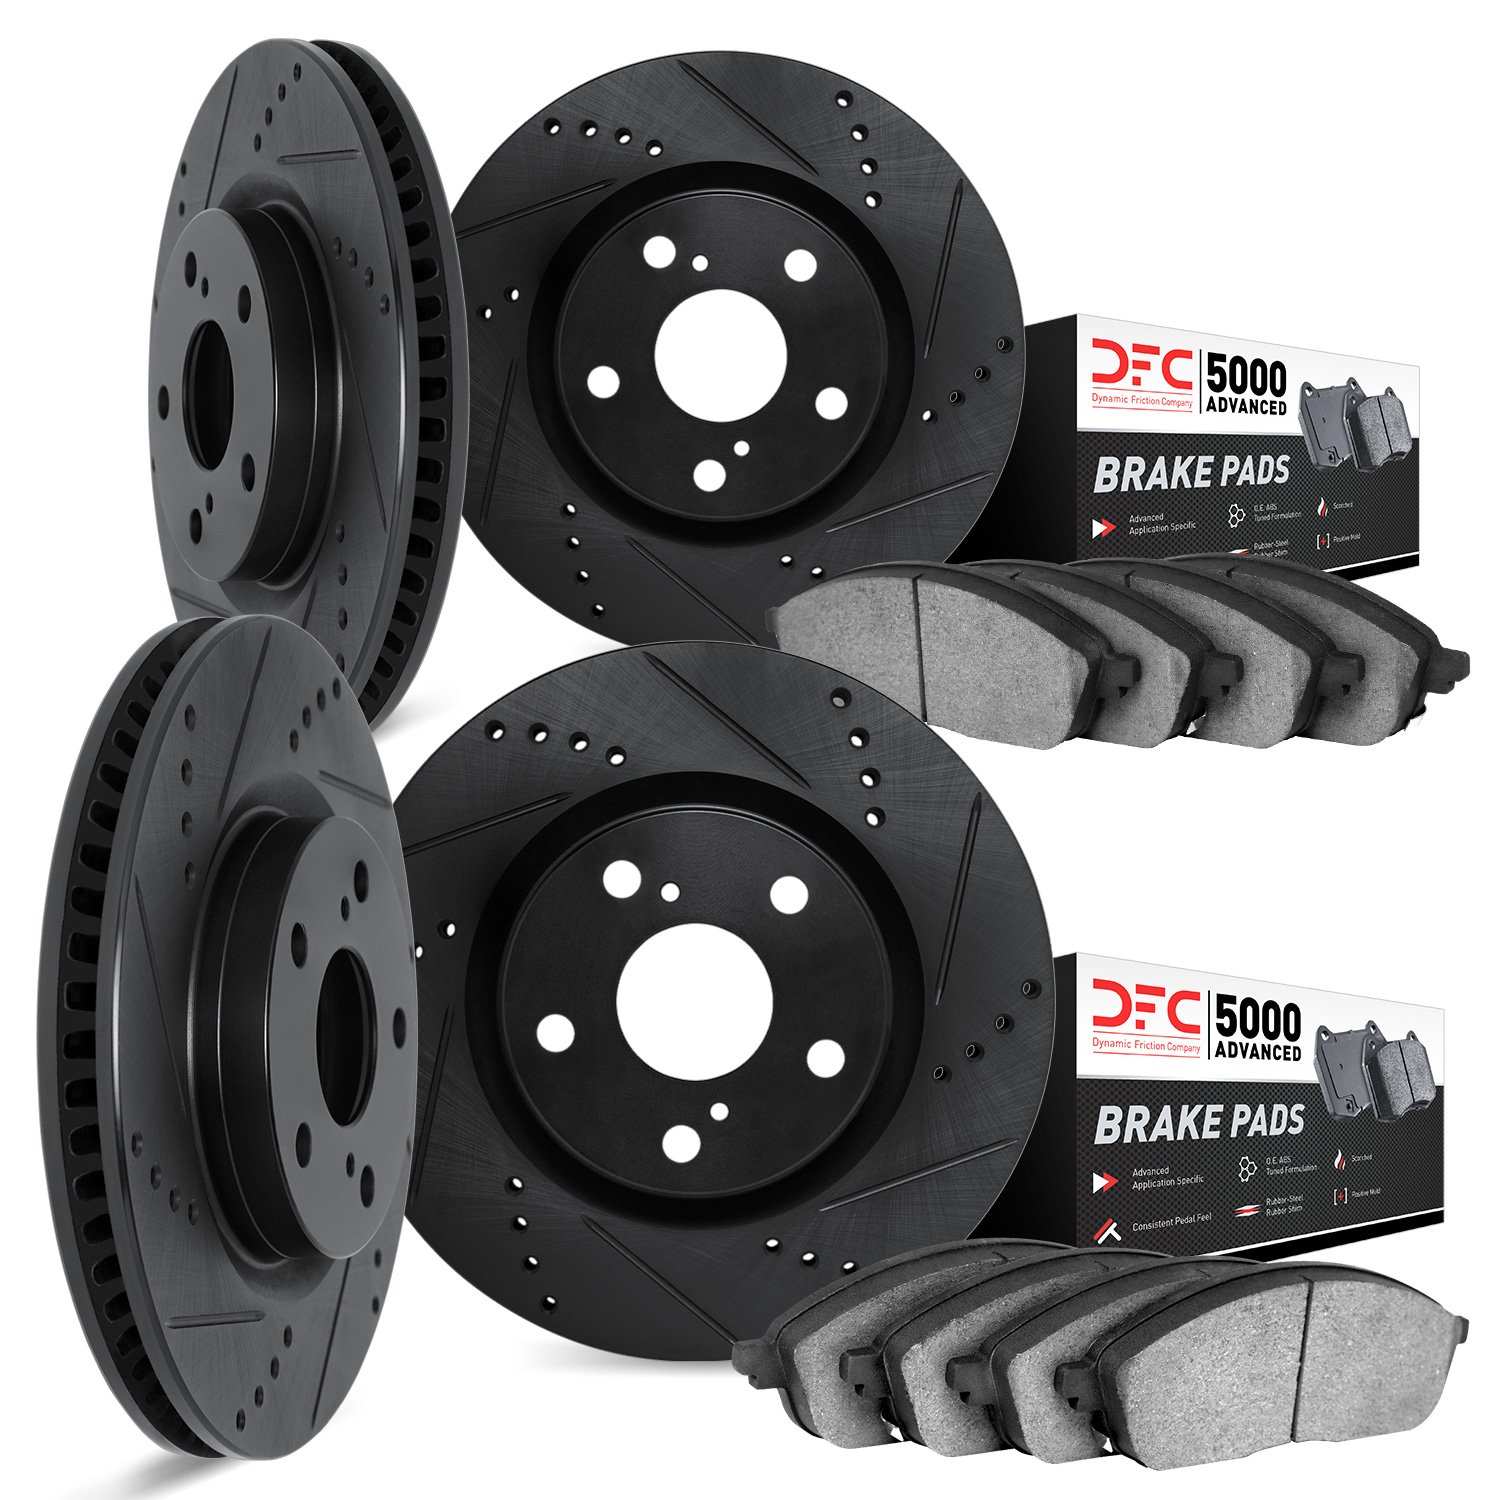 8504-31036 Drilled/Slotted Brake Rotors w/5000 Advanced Brake Pads Kit [Black], 2010-2017 BMW, Position: Front and Rear